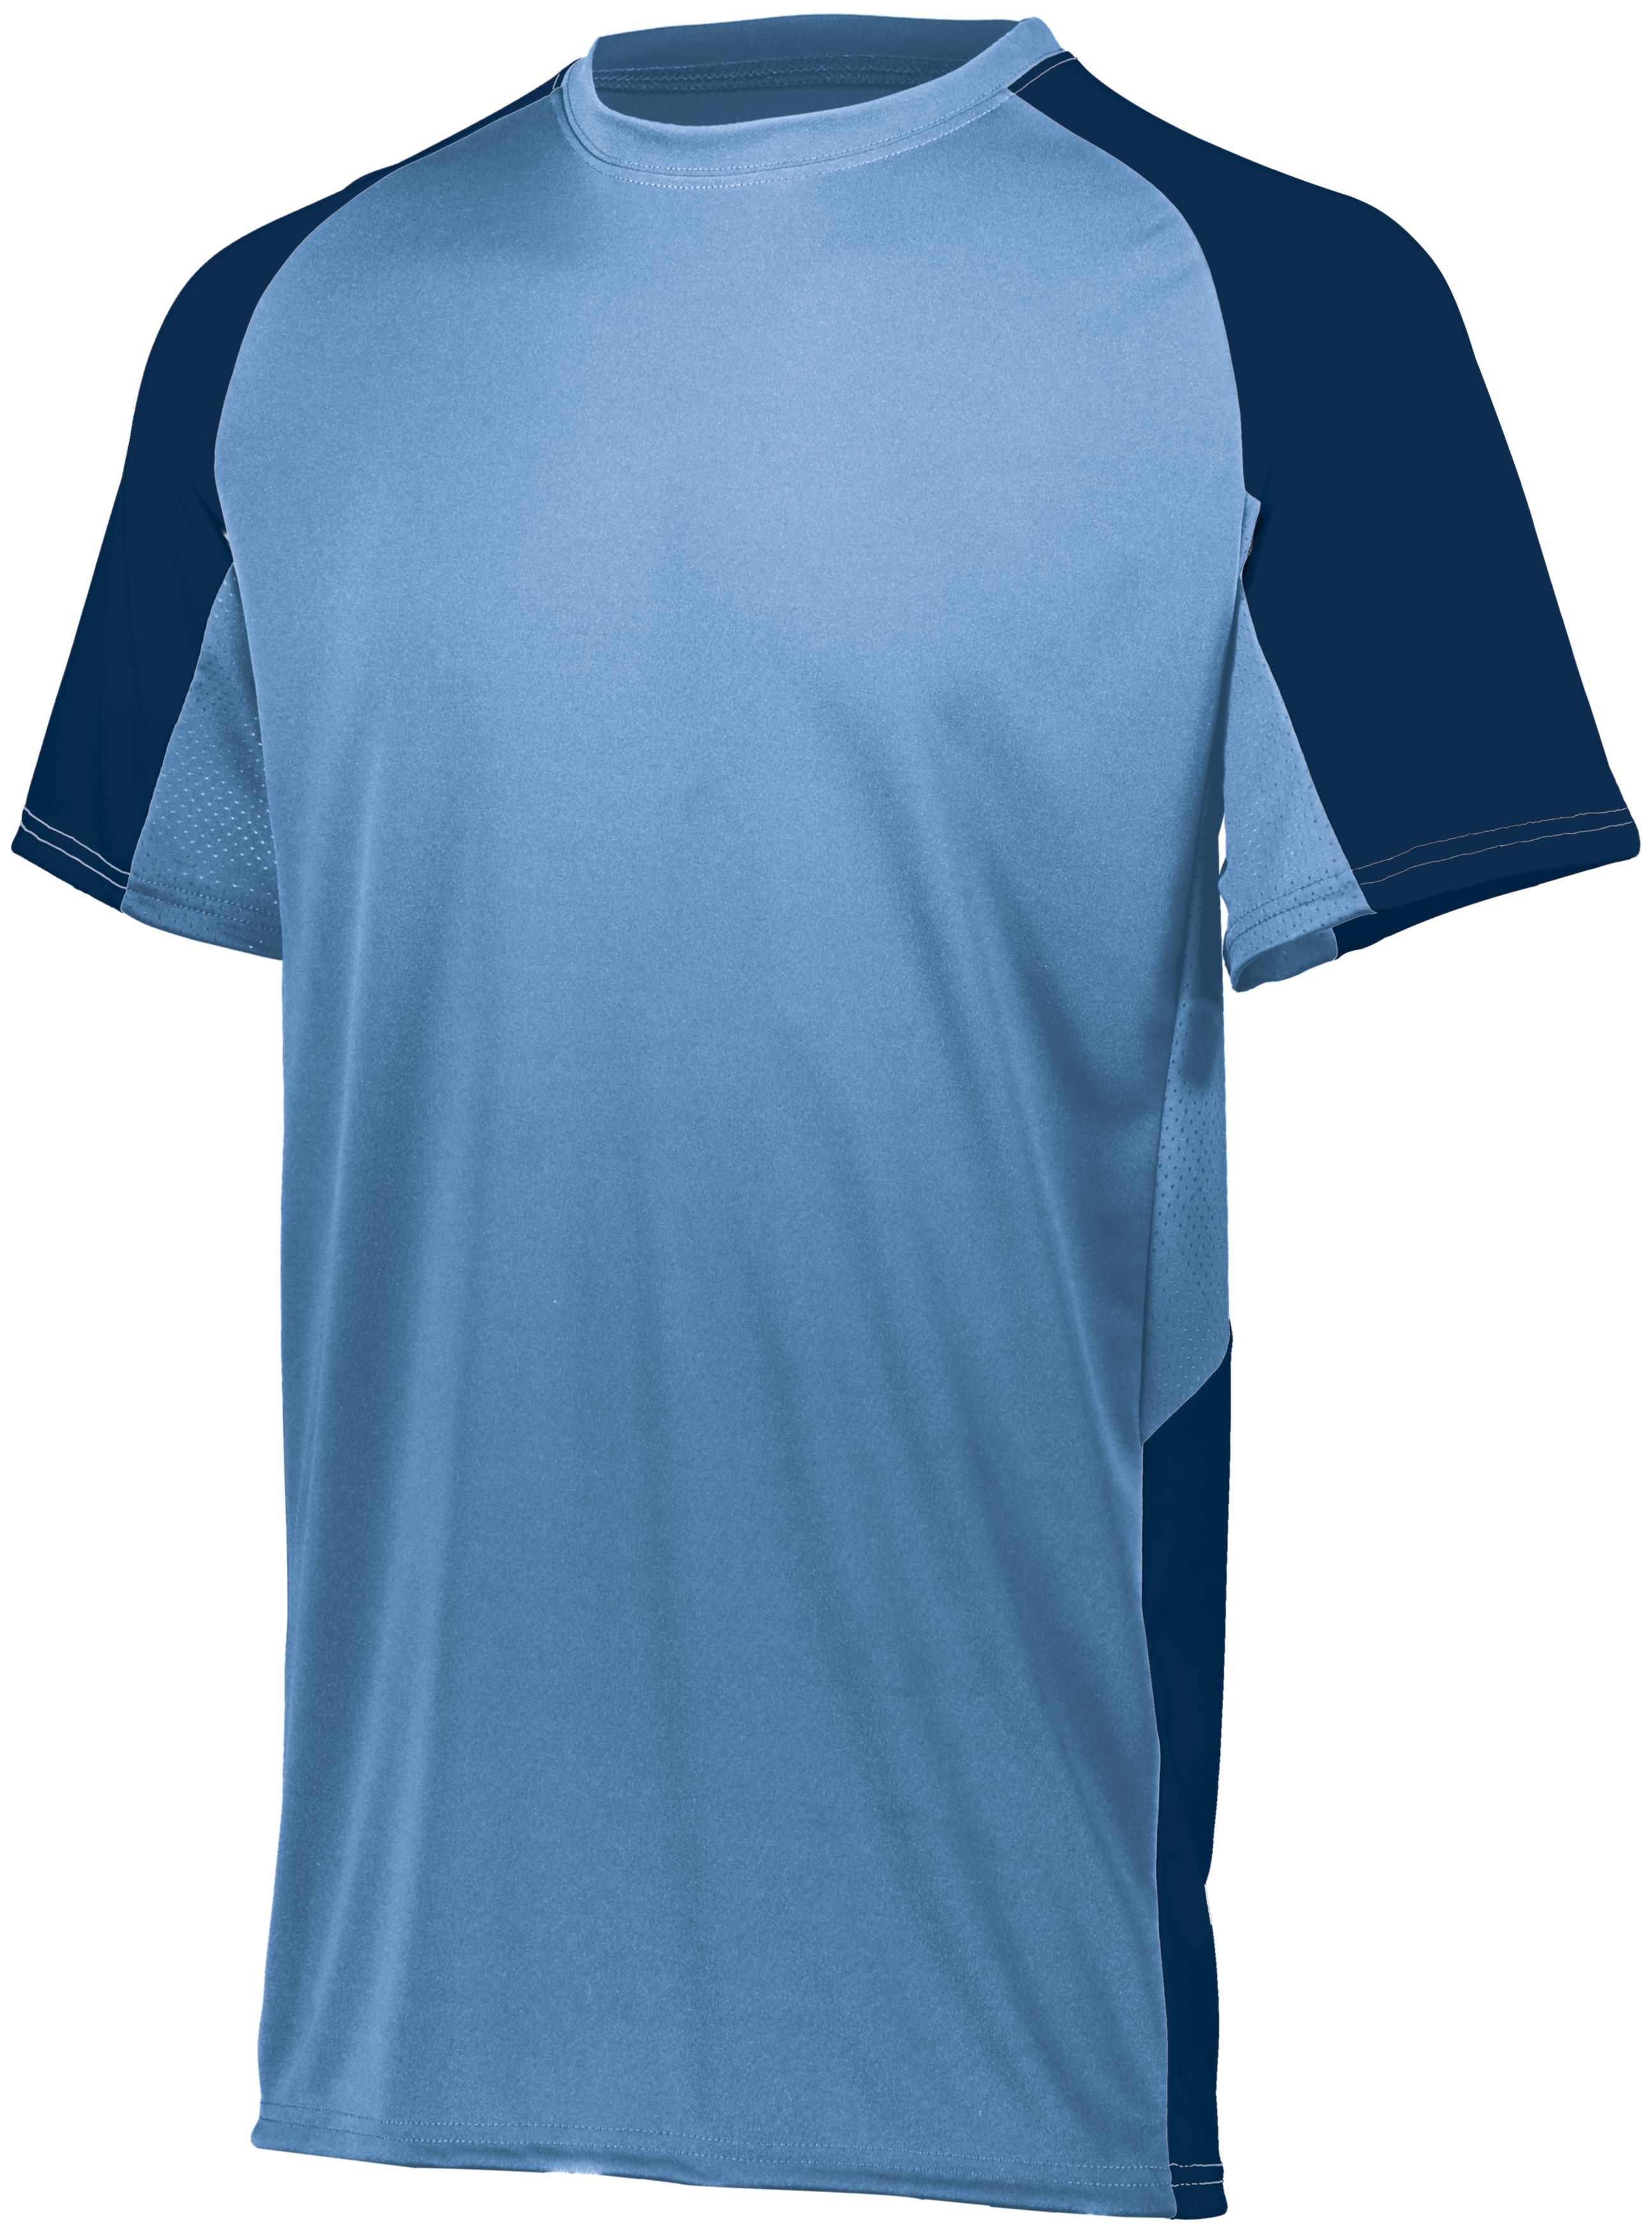 click to view Columbia Blue/Navy